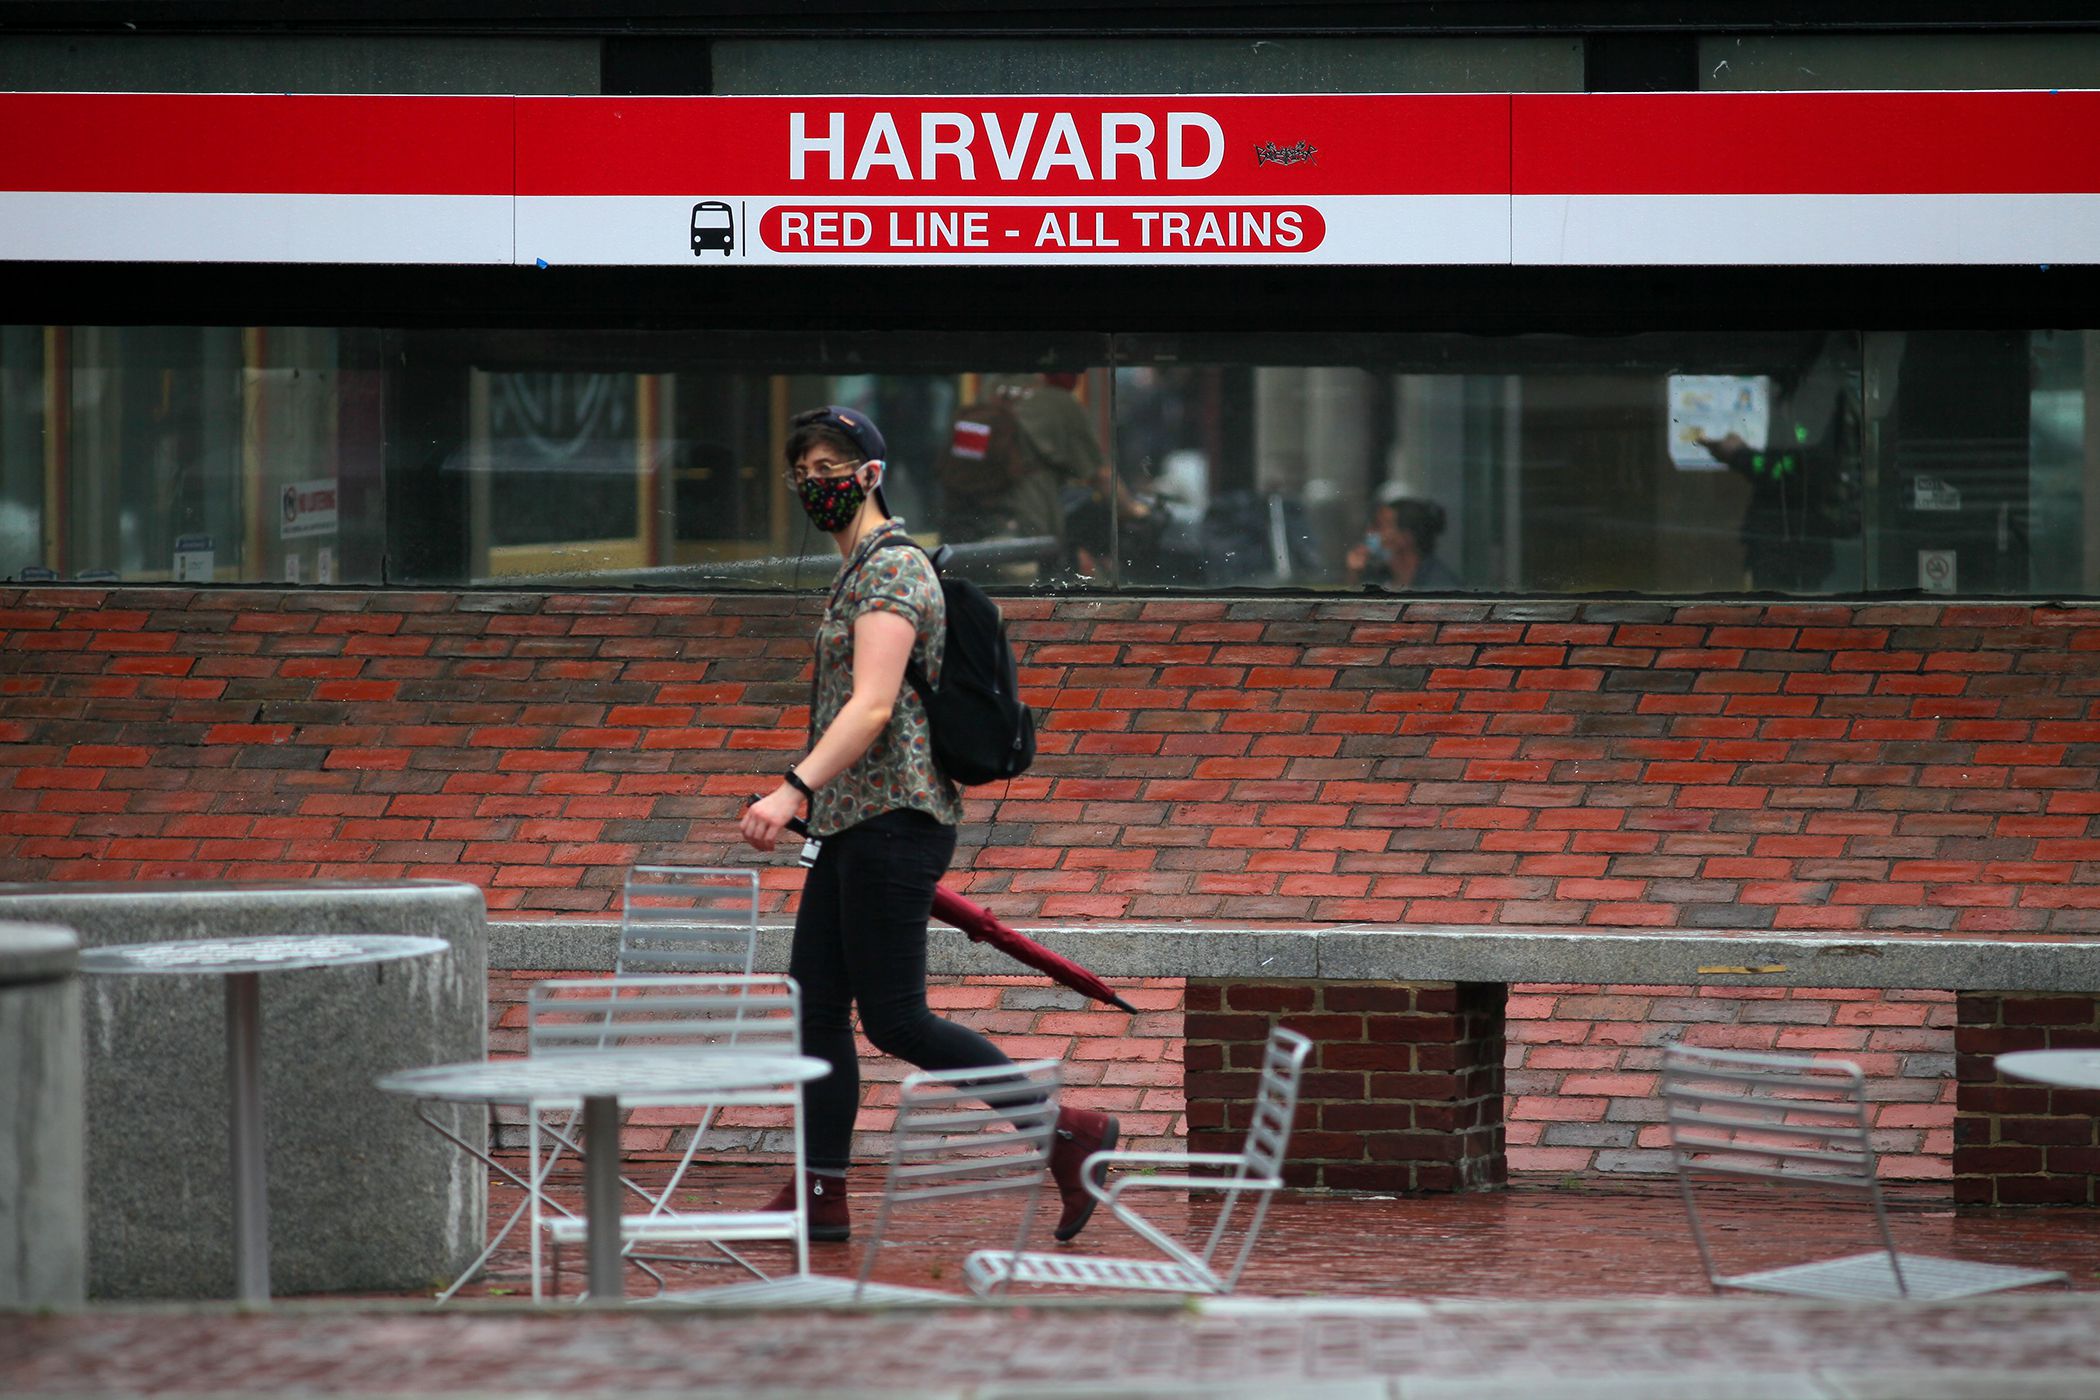 Harvard Square's First Public Toilet Opening Was an Interesting Day